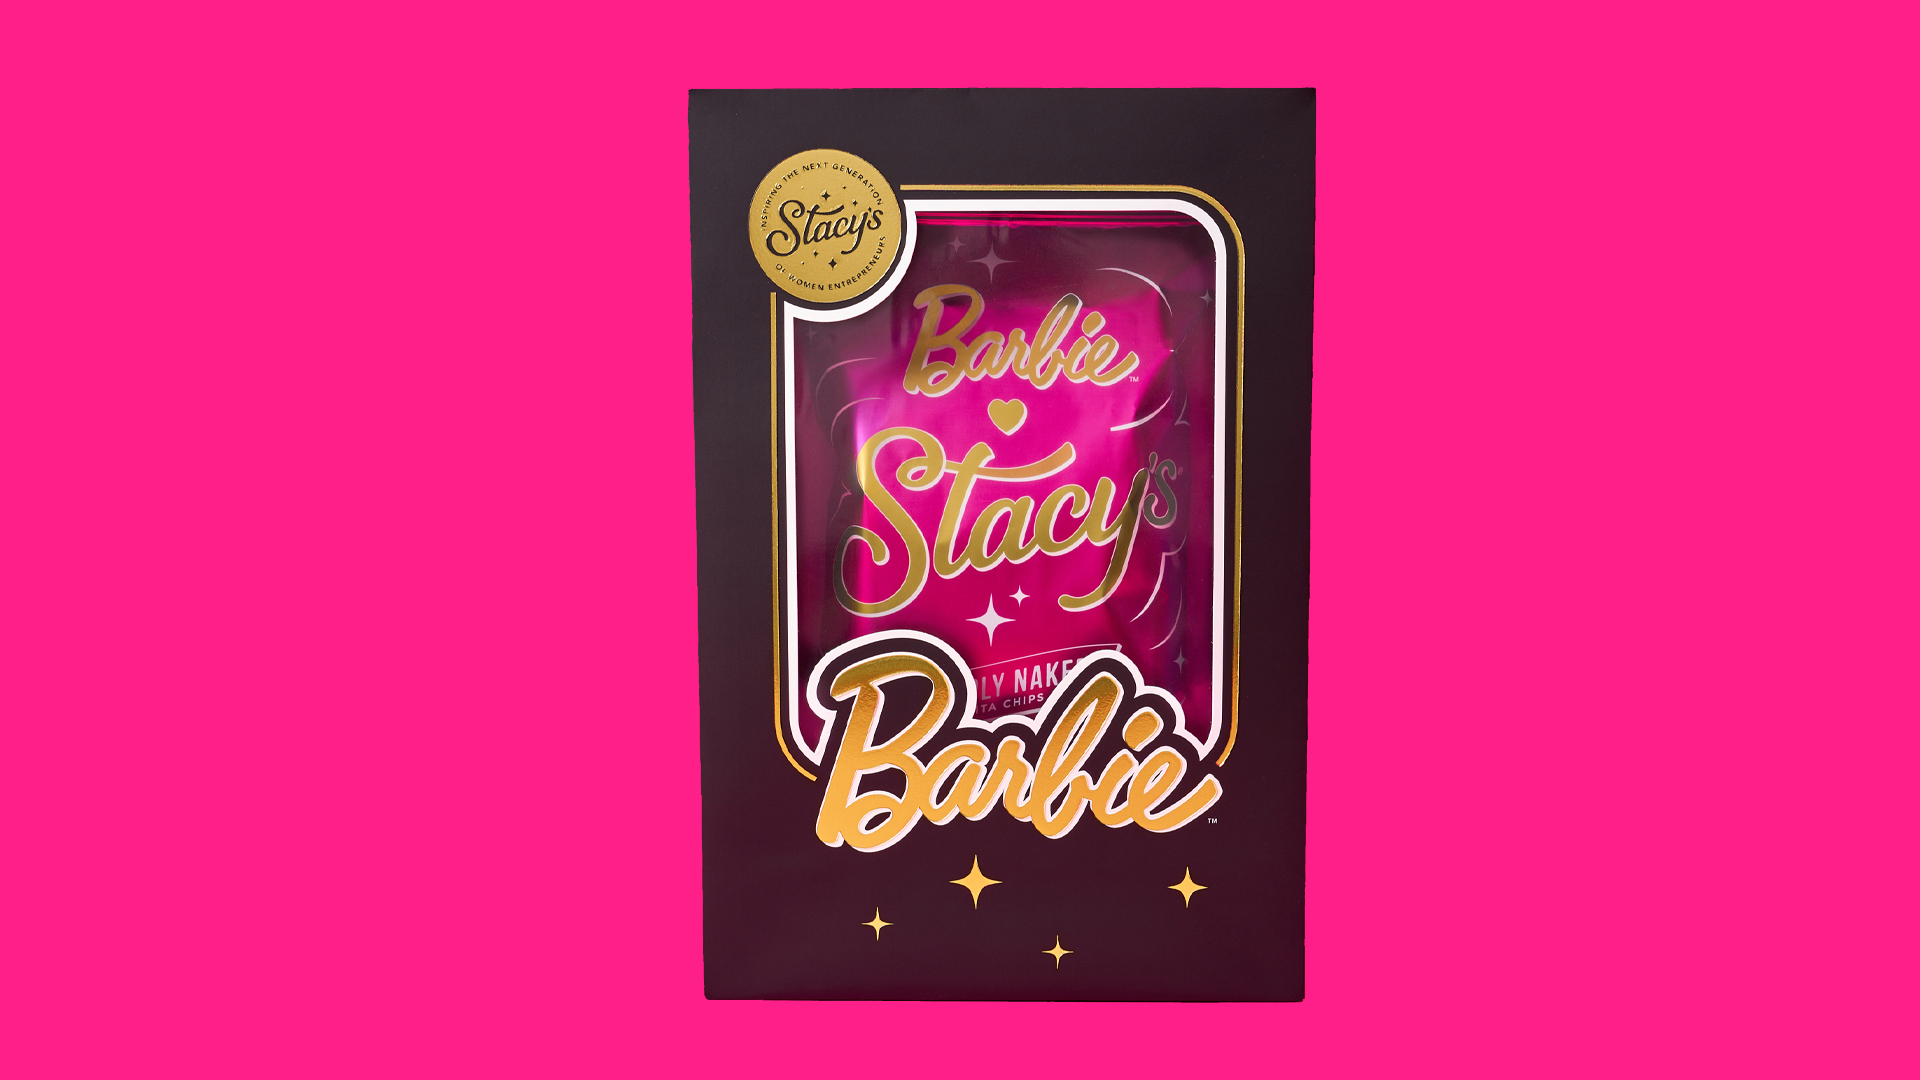 Stacy’s Pita Chips and Barbie Join Forces to Celebrate Women’s History Month